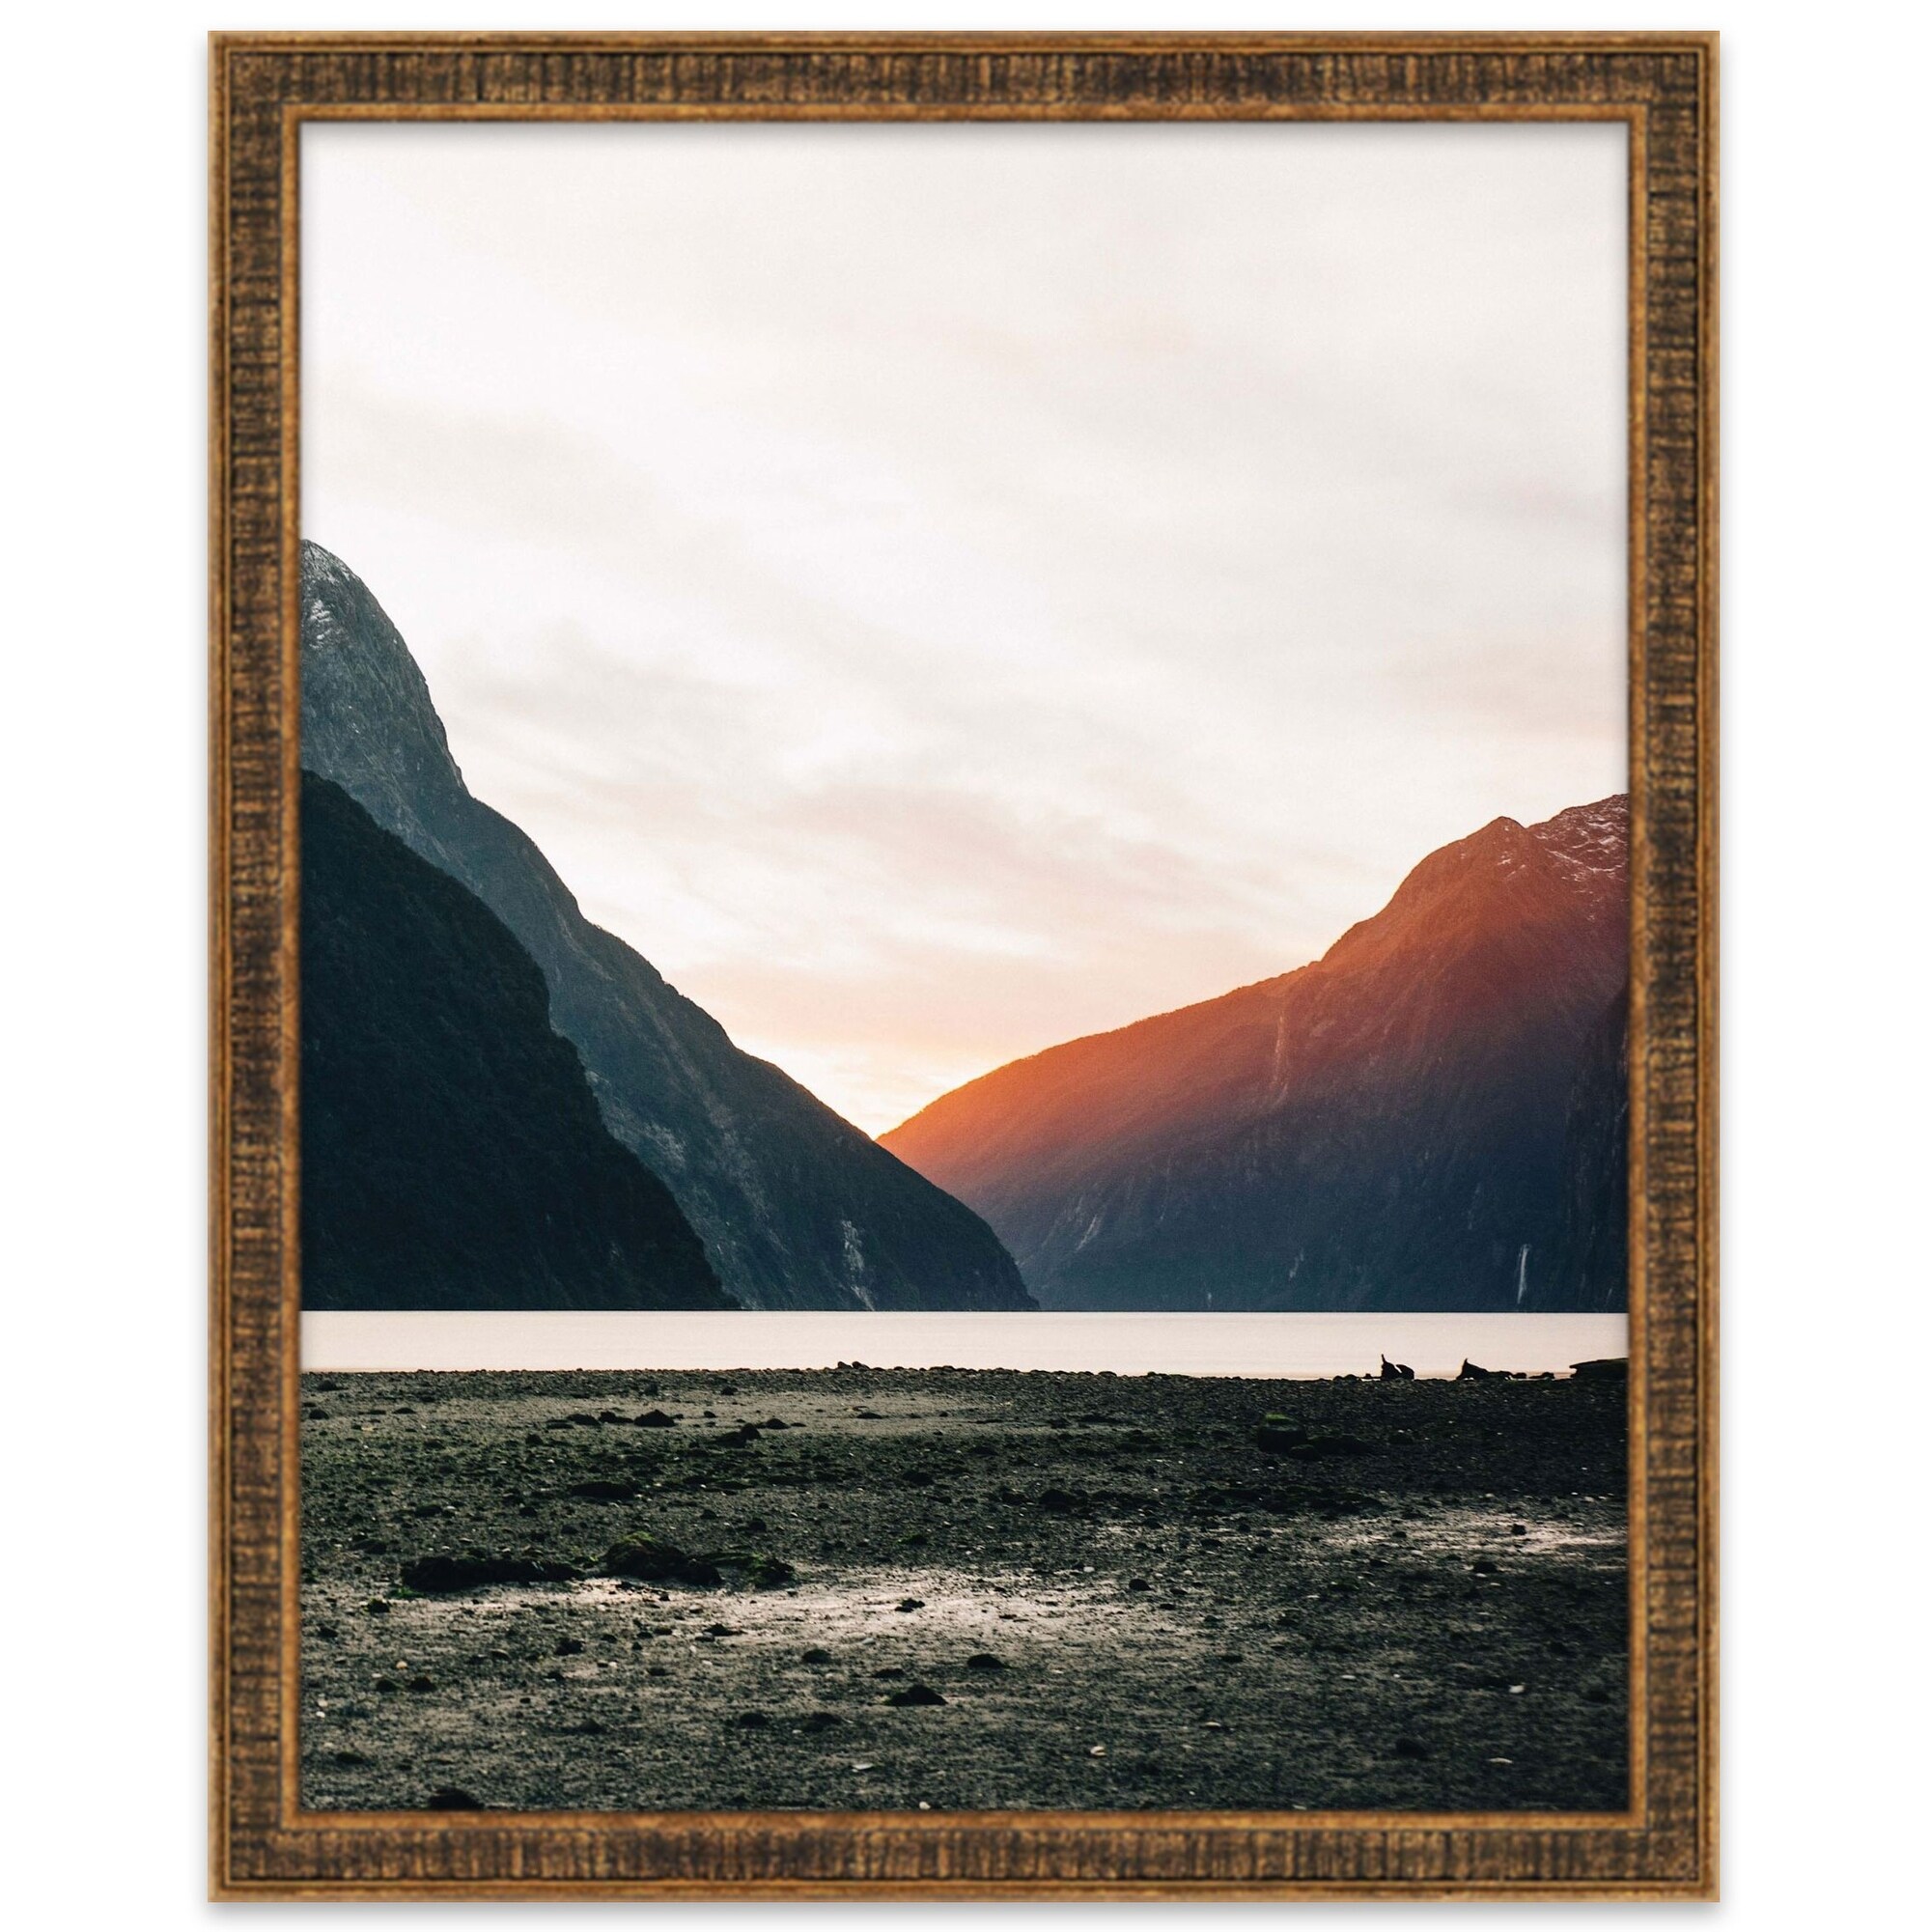 https://ak1.ostkcdn.com/images/products/is/images/direct/f531ff47dc08b824784da6a6015951b9eb30d8ec/10x6-Frame-Gold-Picture-Frame---Complete-Modern-Photo-Frame-Includes.jpg